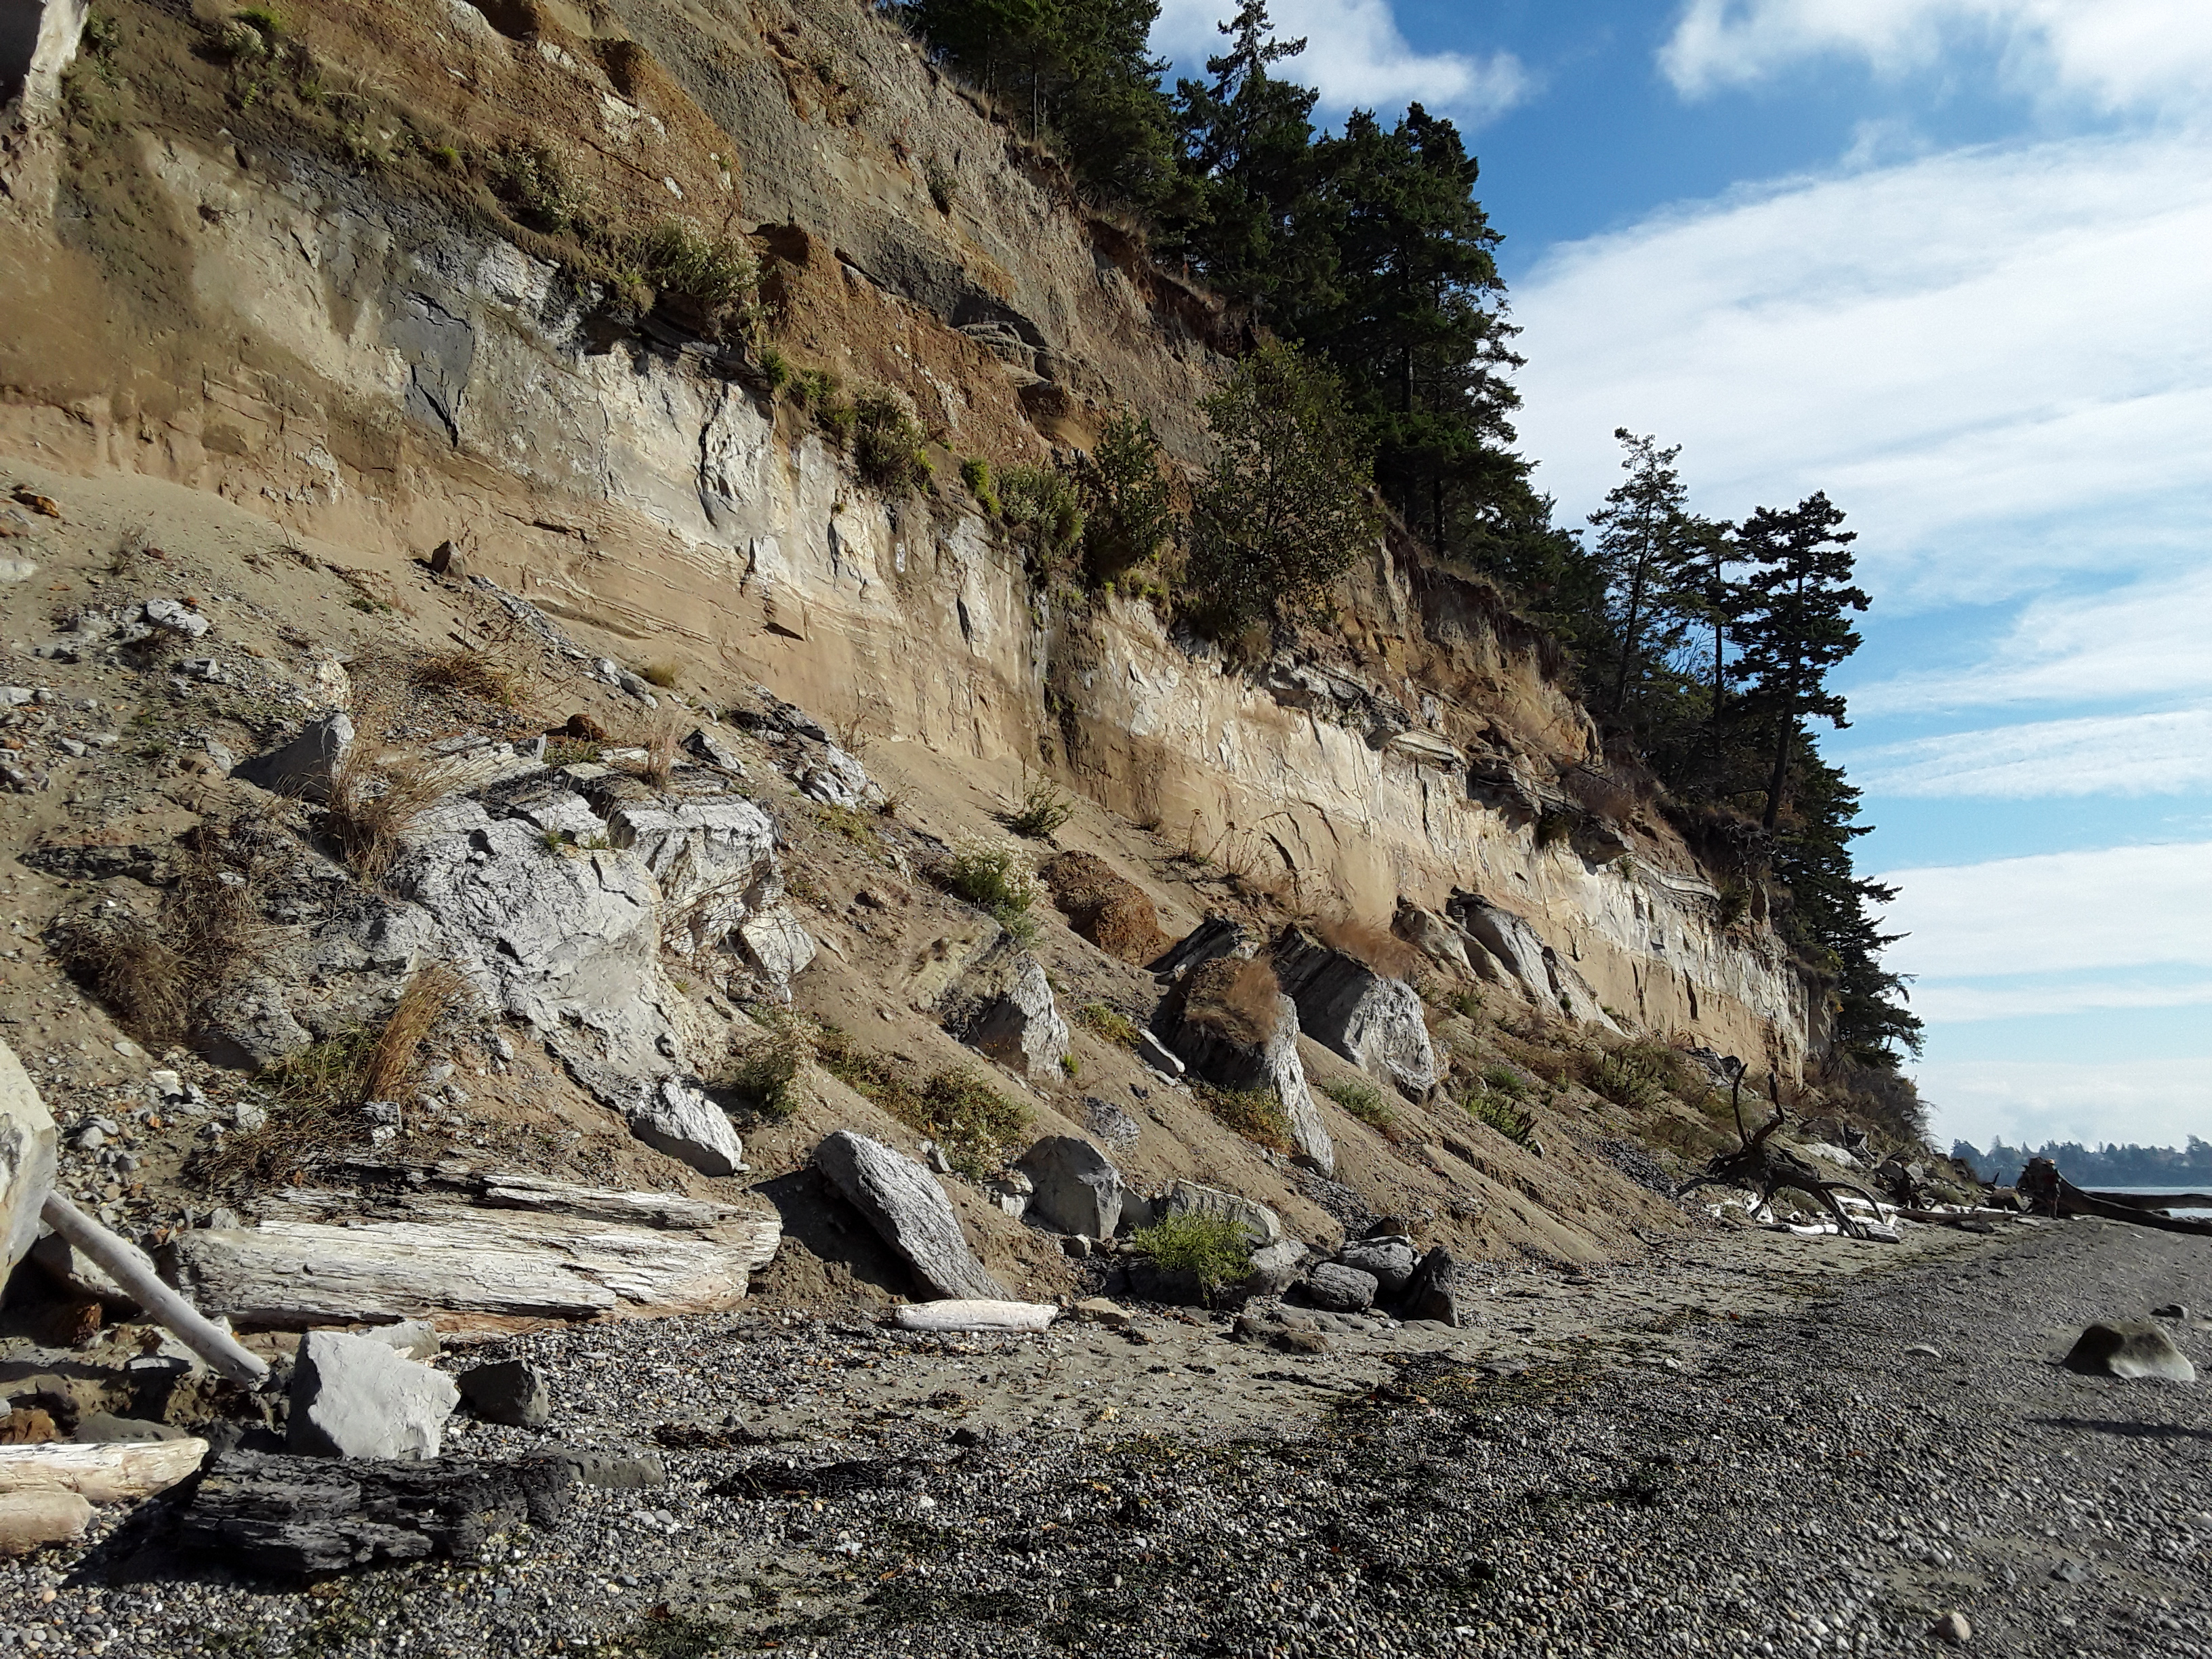 Kelly's Point Conservation Area exposes sediments deposited by glaciers tens of thousands of years old. Photograph credit: Skagit Land Trust staff.